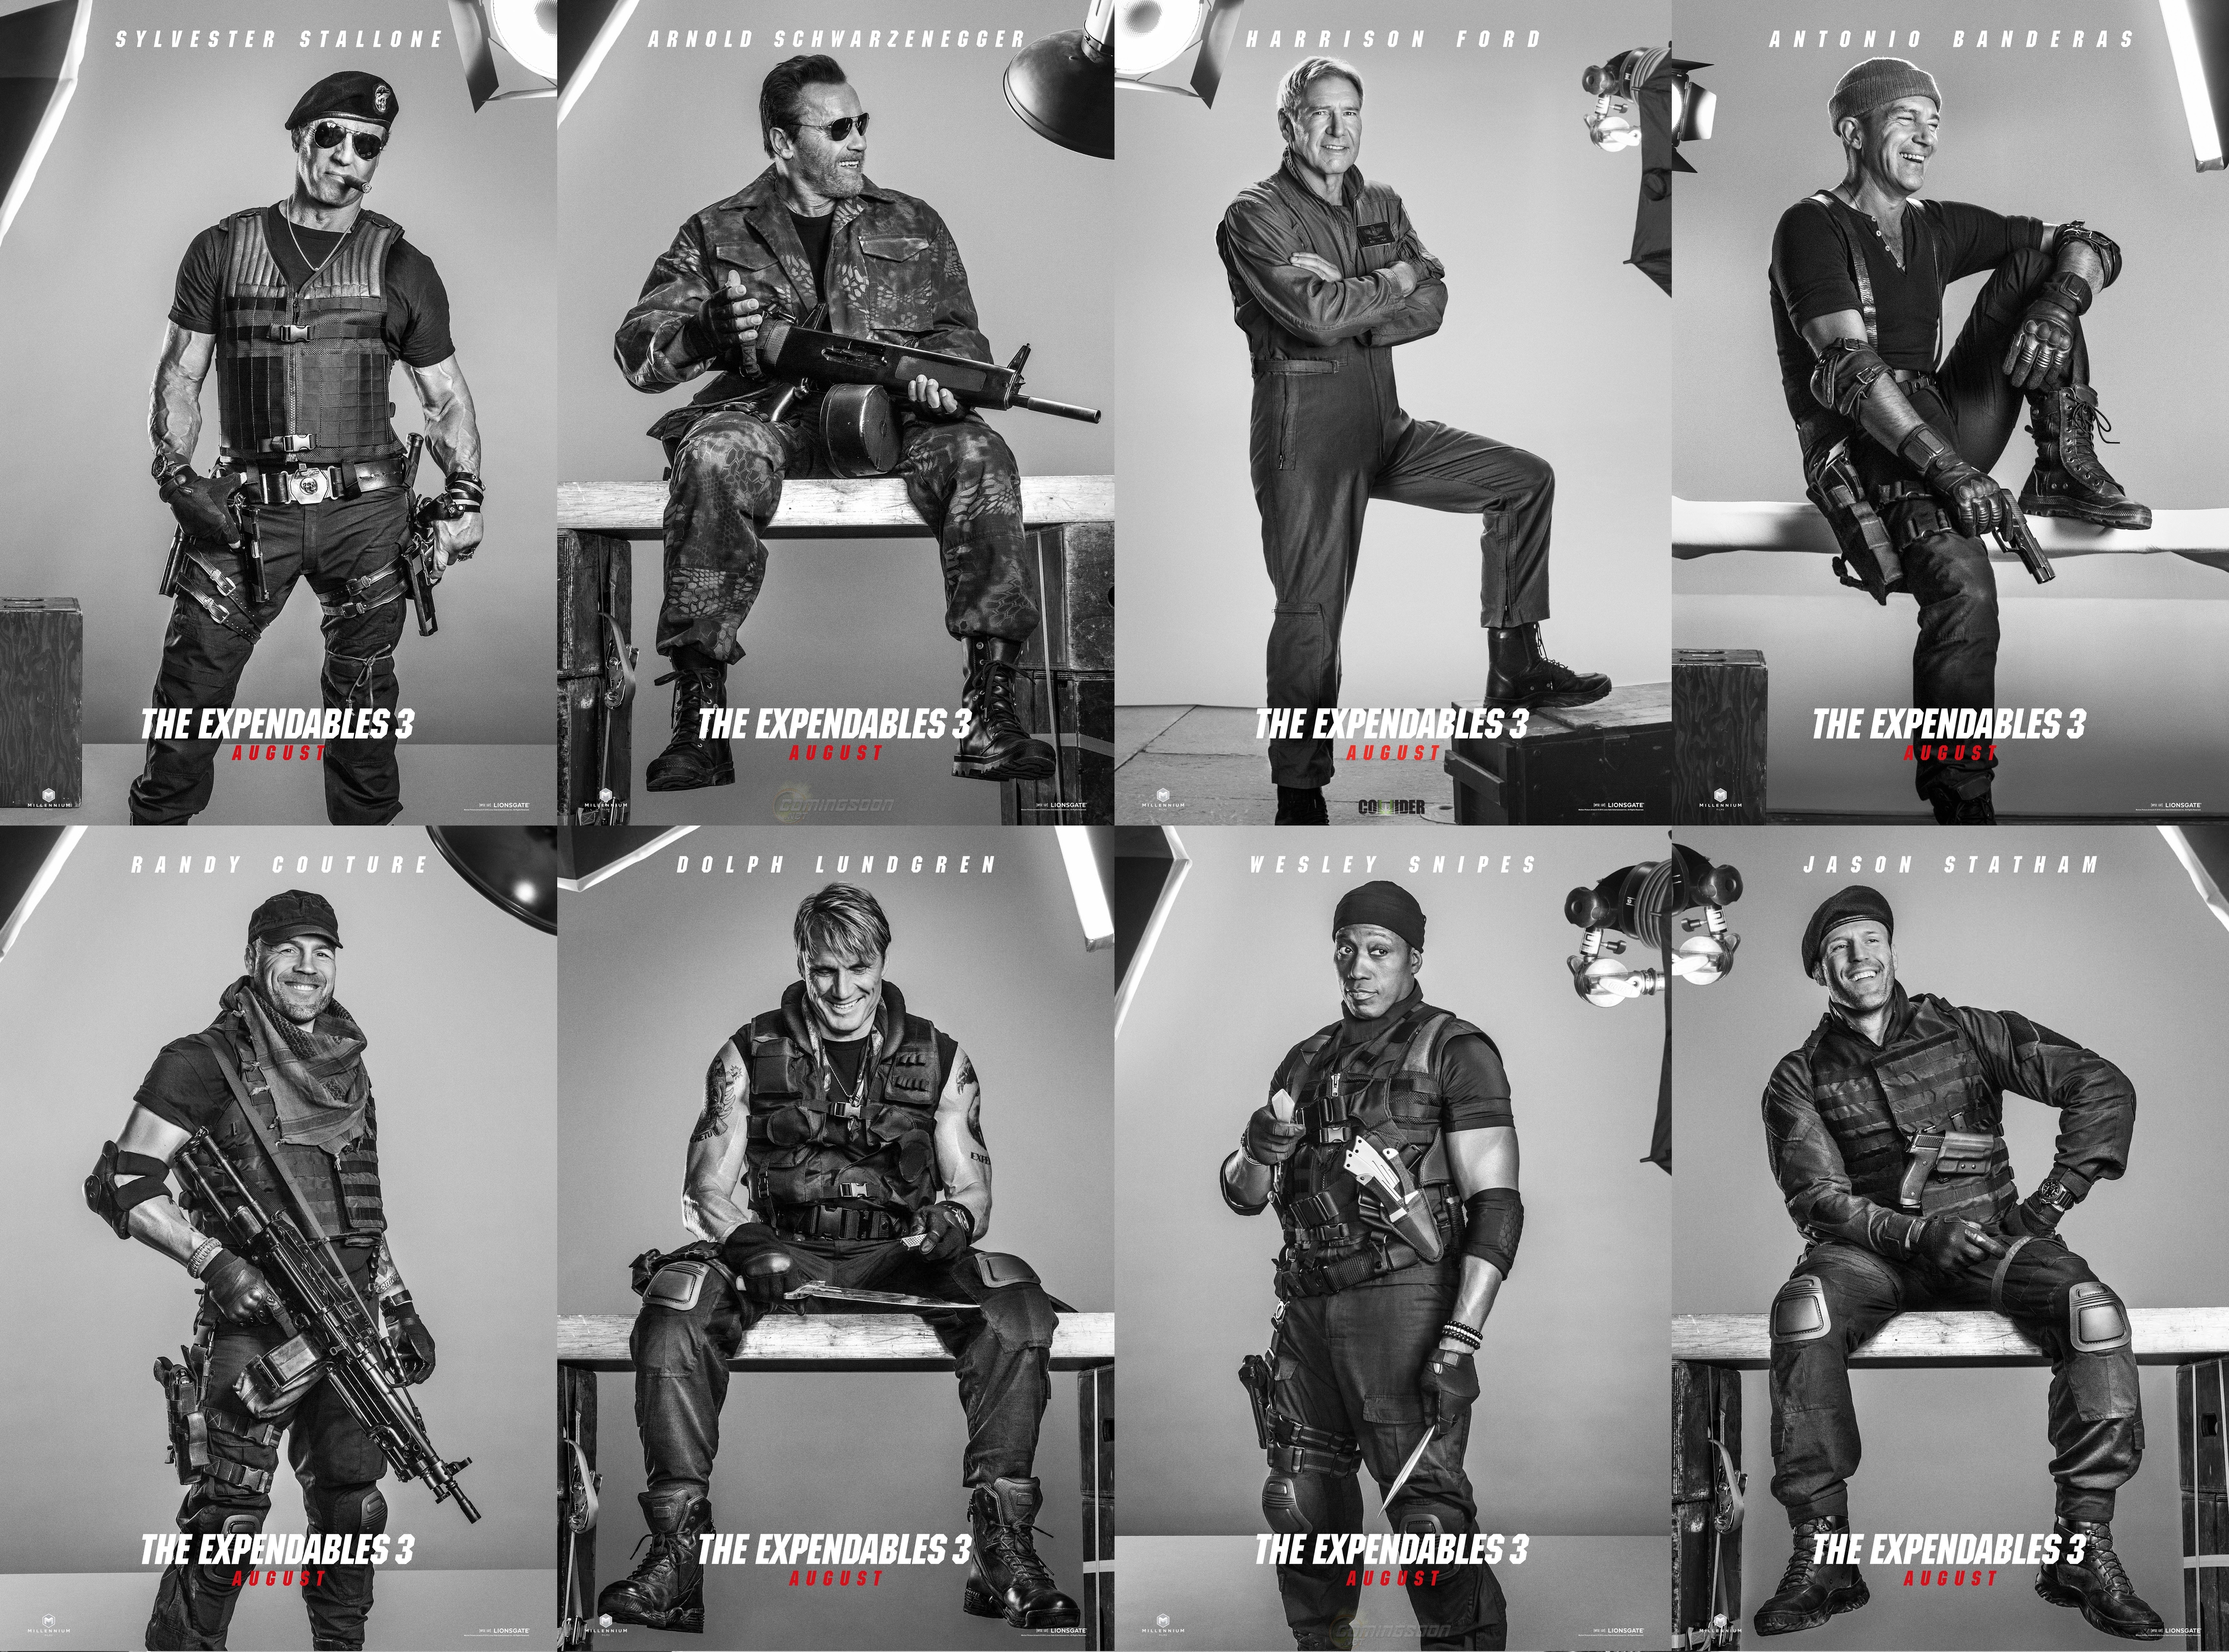 harrison ford, wesley snipes, movie, the expendables 3, antonio banderas, arnold schwarzenegger, barney ross, doc (the expendables), dolph lundgren, galgo (the expendables), gunnar jensen, jason statham, lee christmas, max drummer, randy couture, sylvester stallone, toll road, trench (the expendables), the expendables 8K